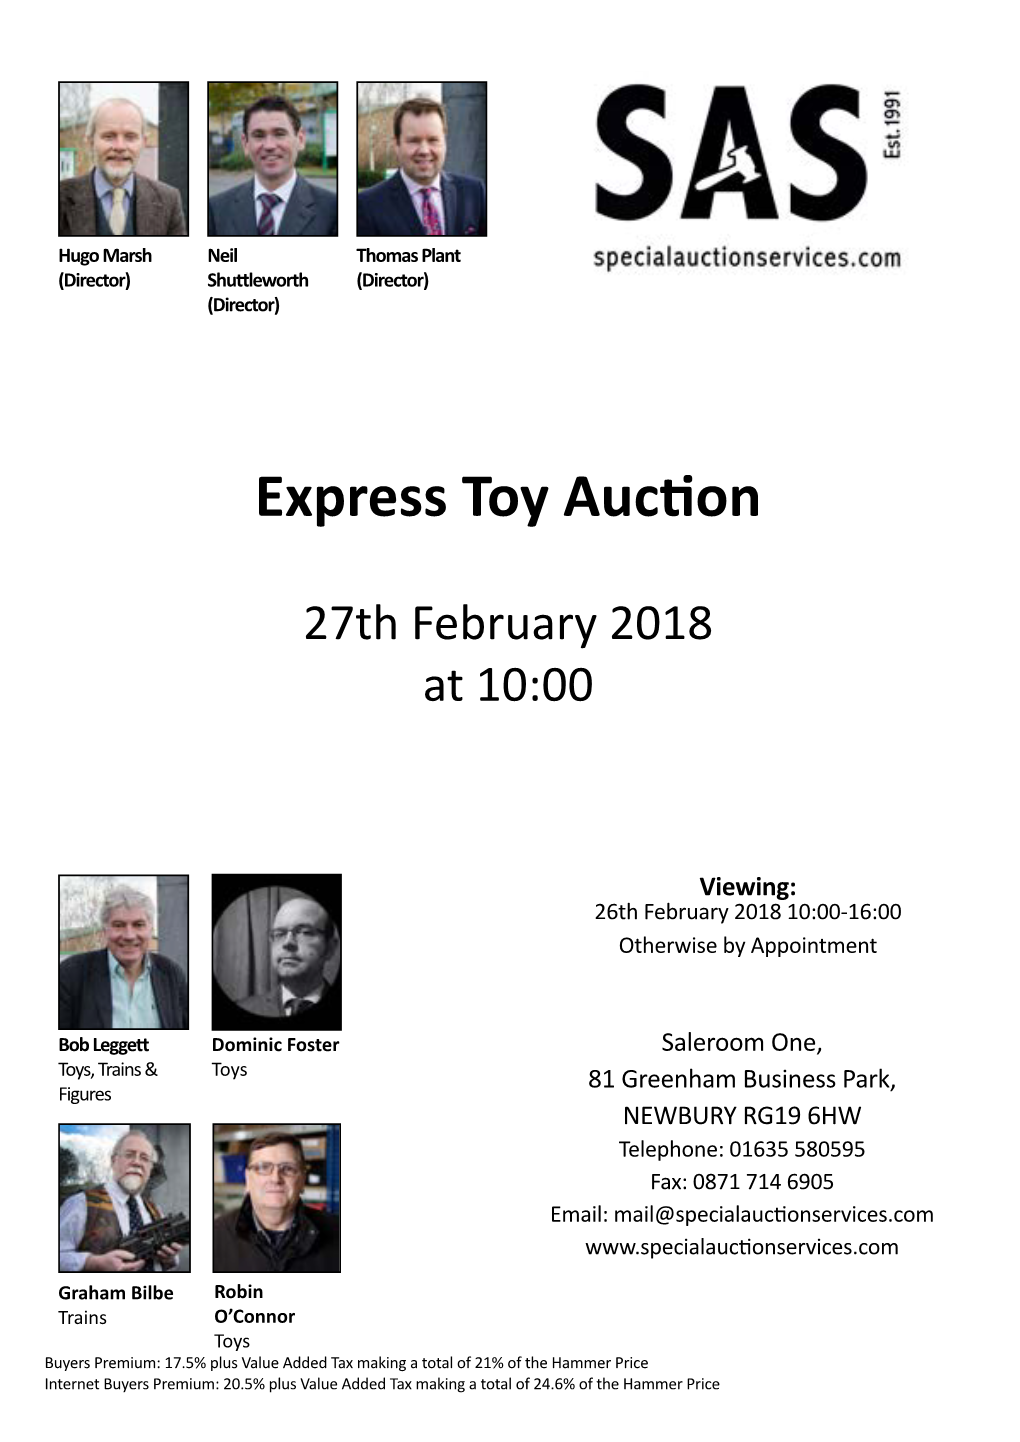 Express Toy Auction